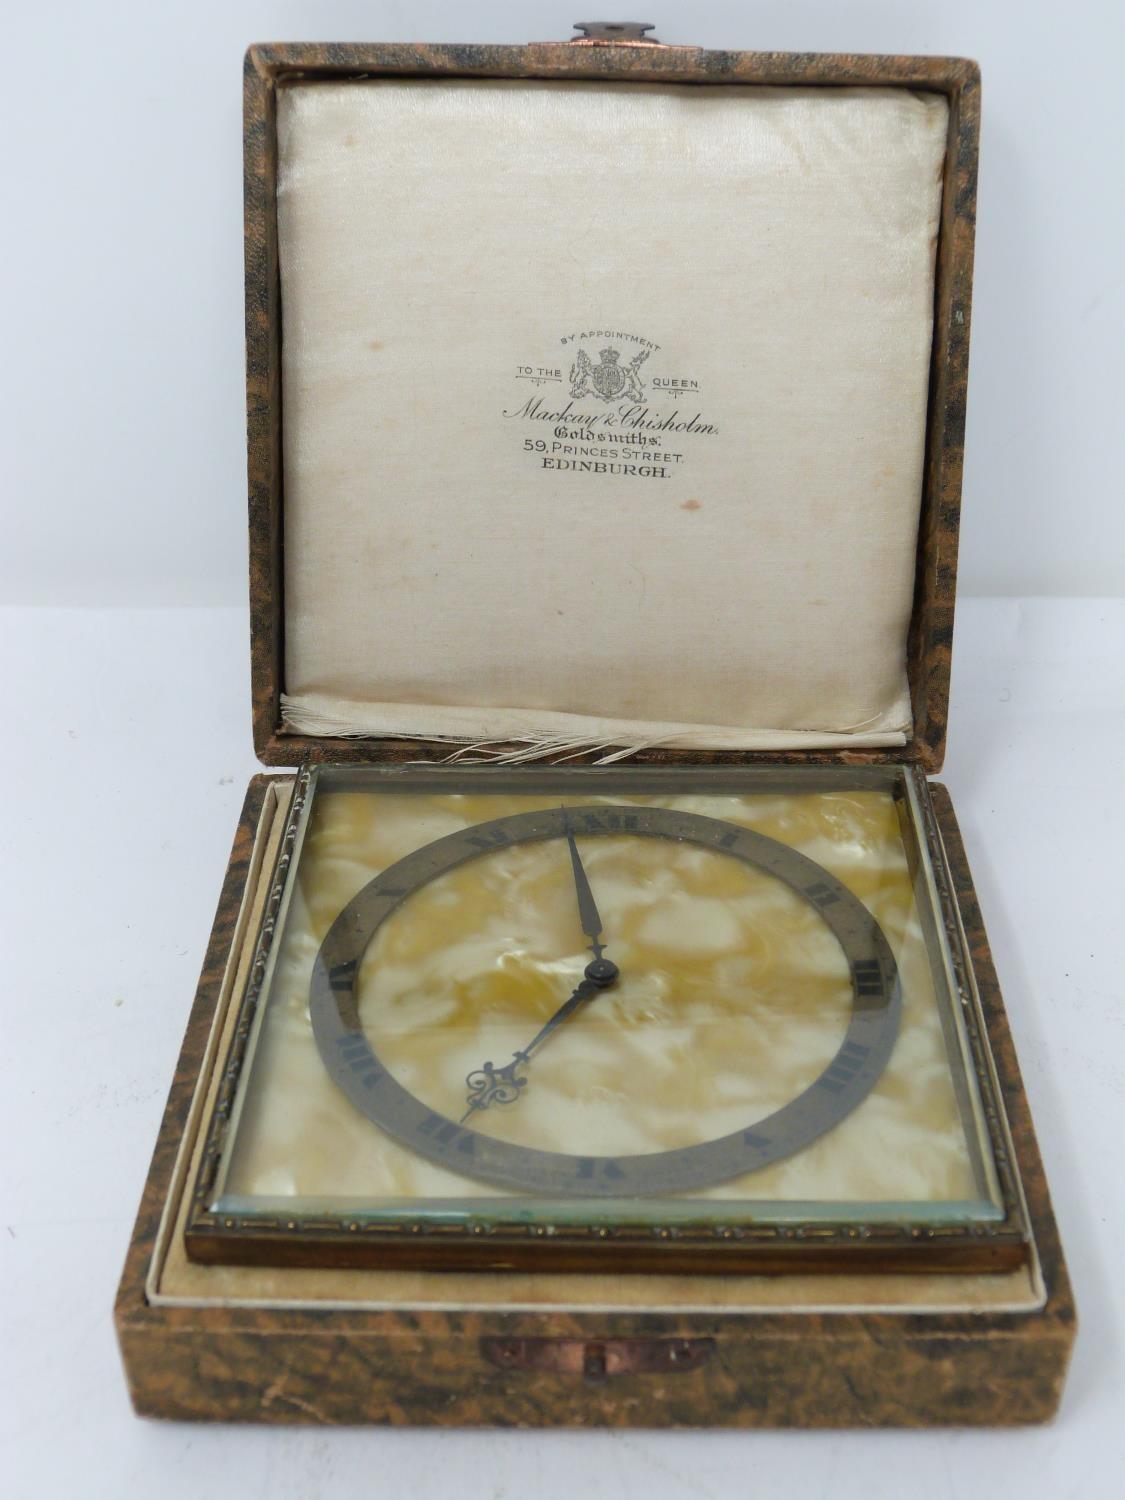 An Art Deco gilded bronze cased desk clock by Mackay & Chisholm. In its original fitted box with